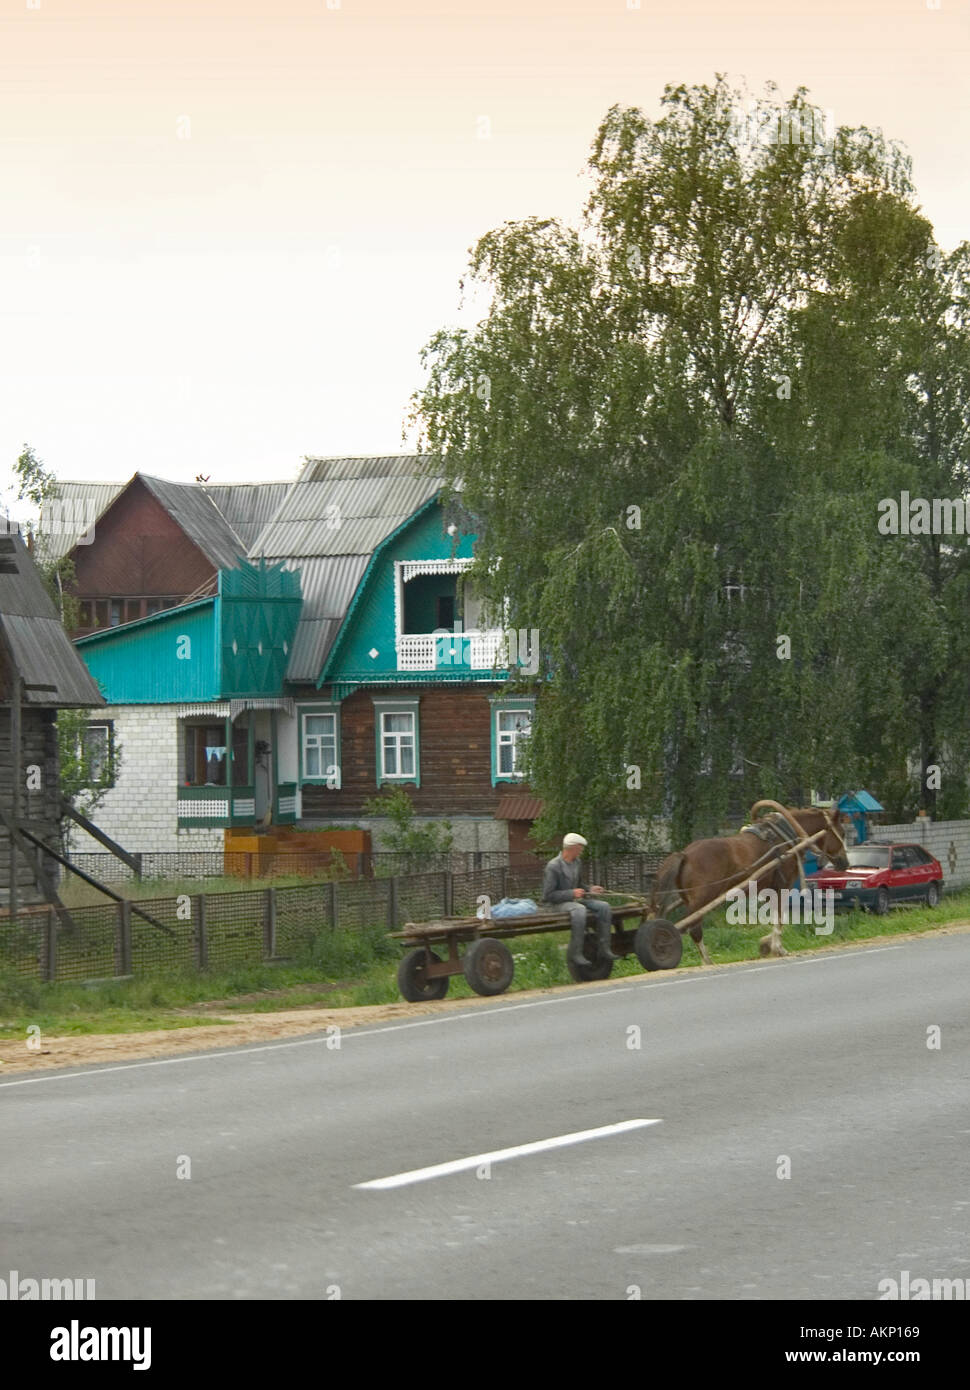 Horse and cart on main road with Dutch style houses behind in Belarus Stock Photo